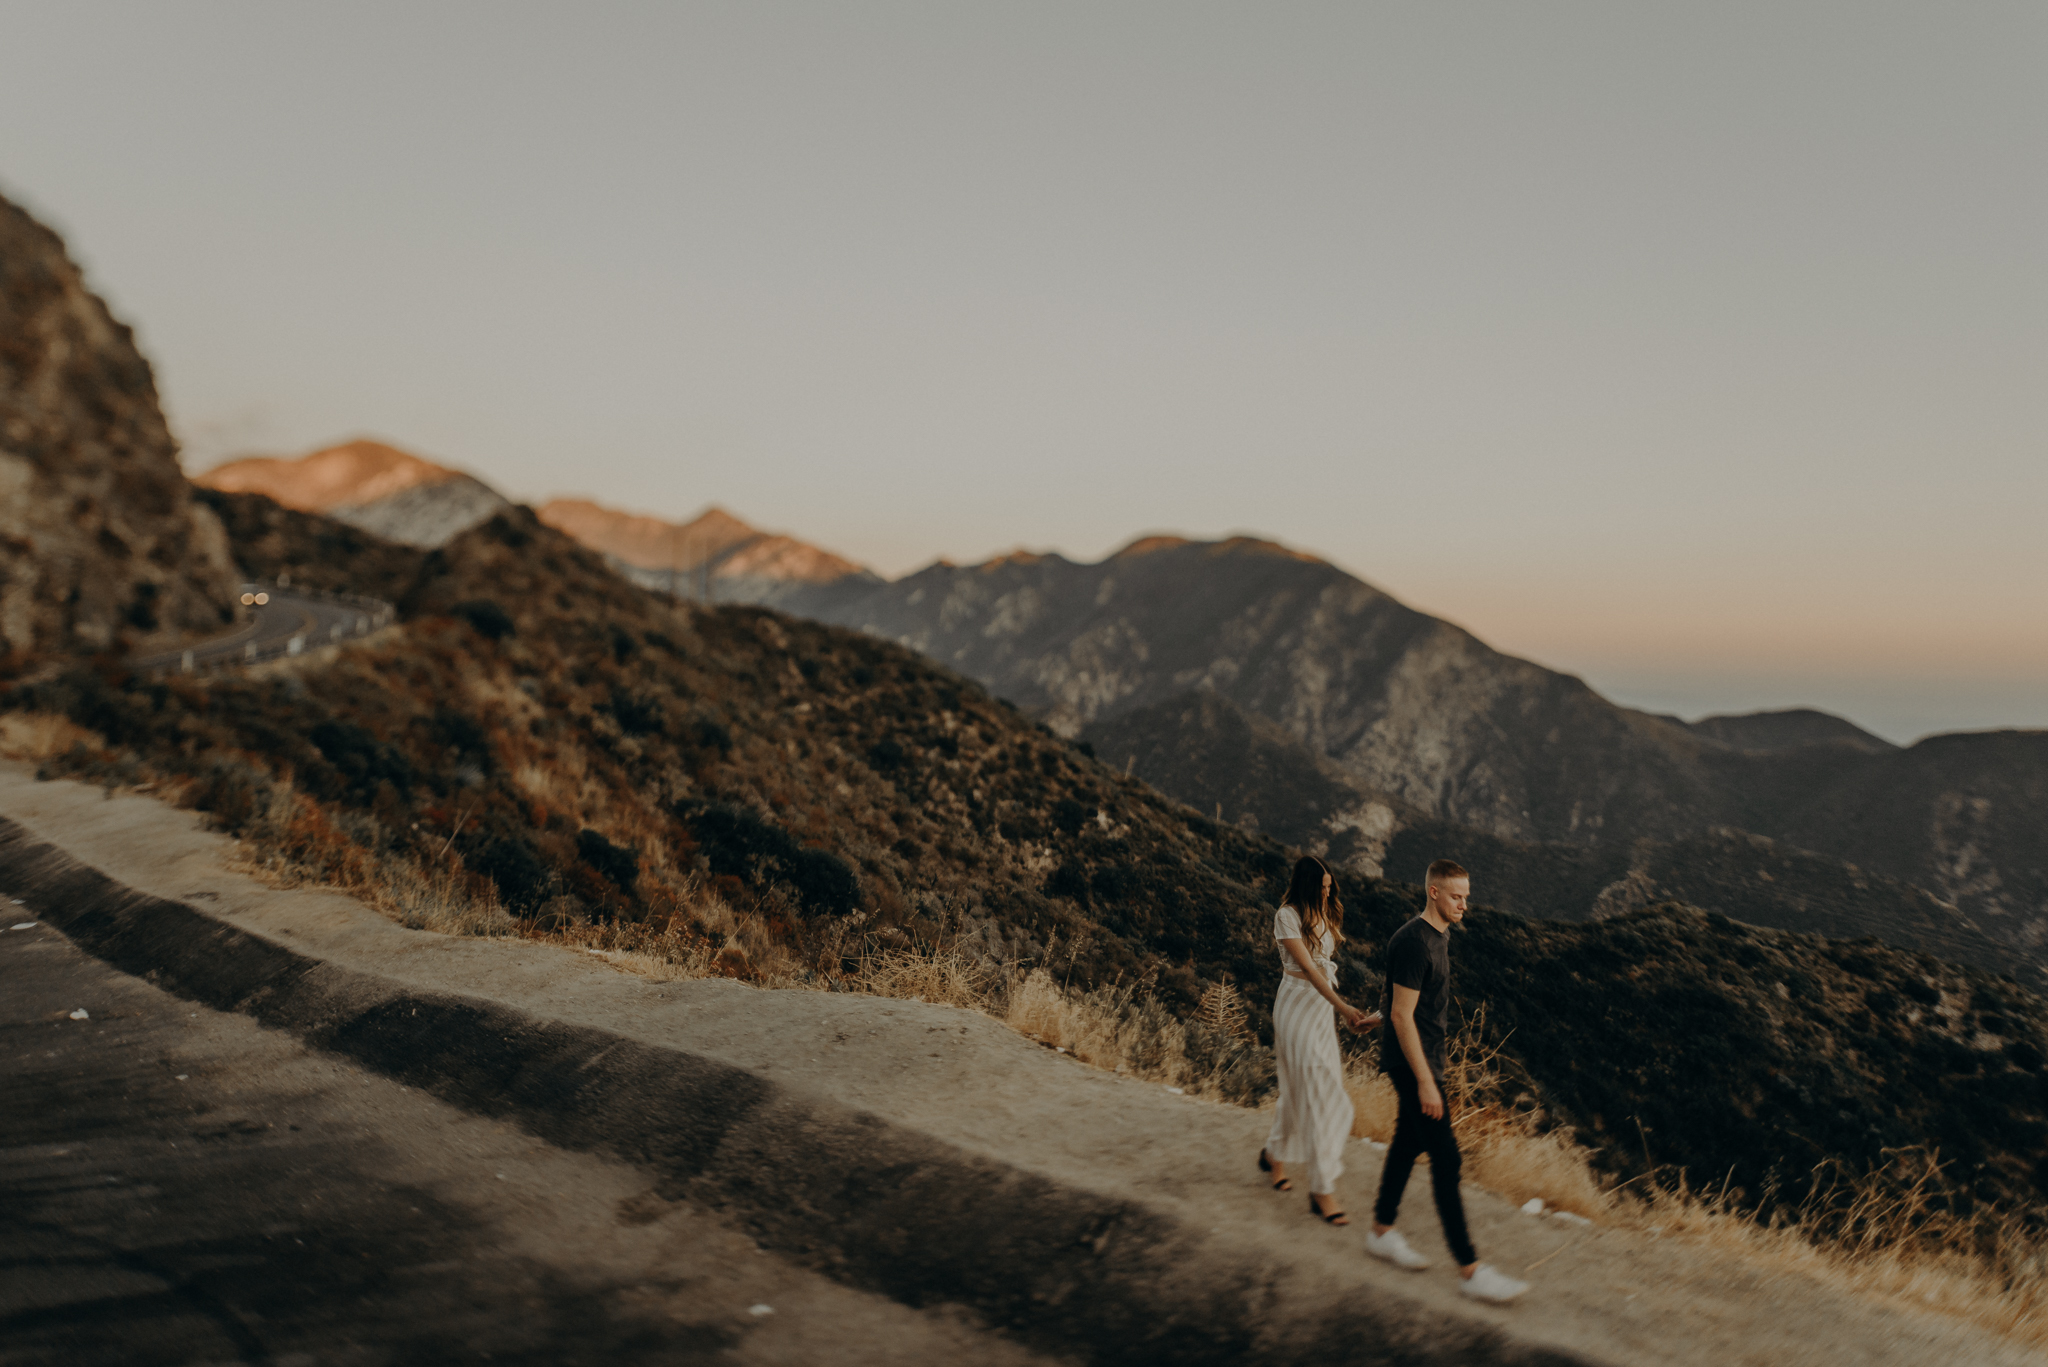 Isaiah + Taylor Photography - Los Angeles Forest Engagement Session - Laid back wedding photographer-008.jpg